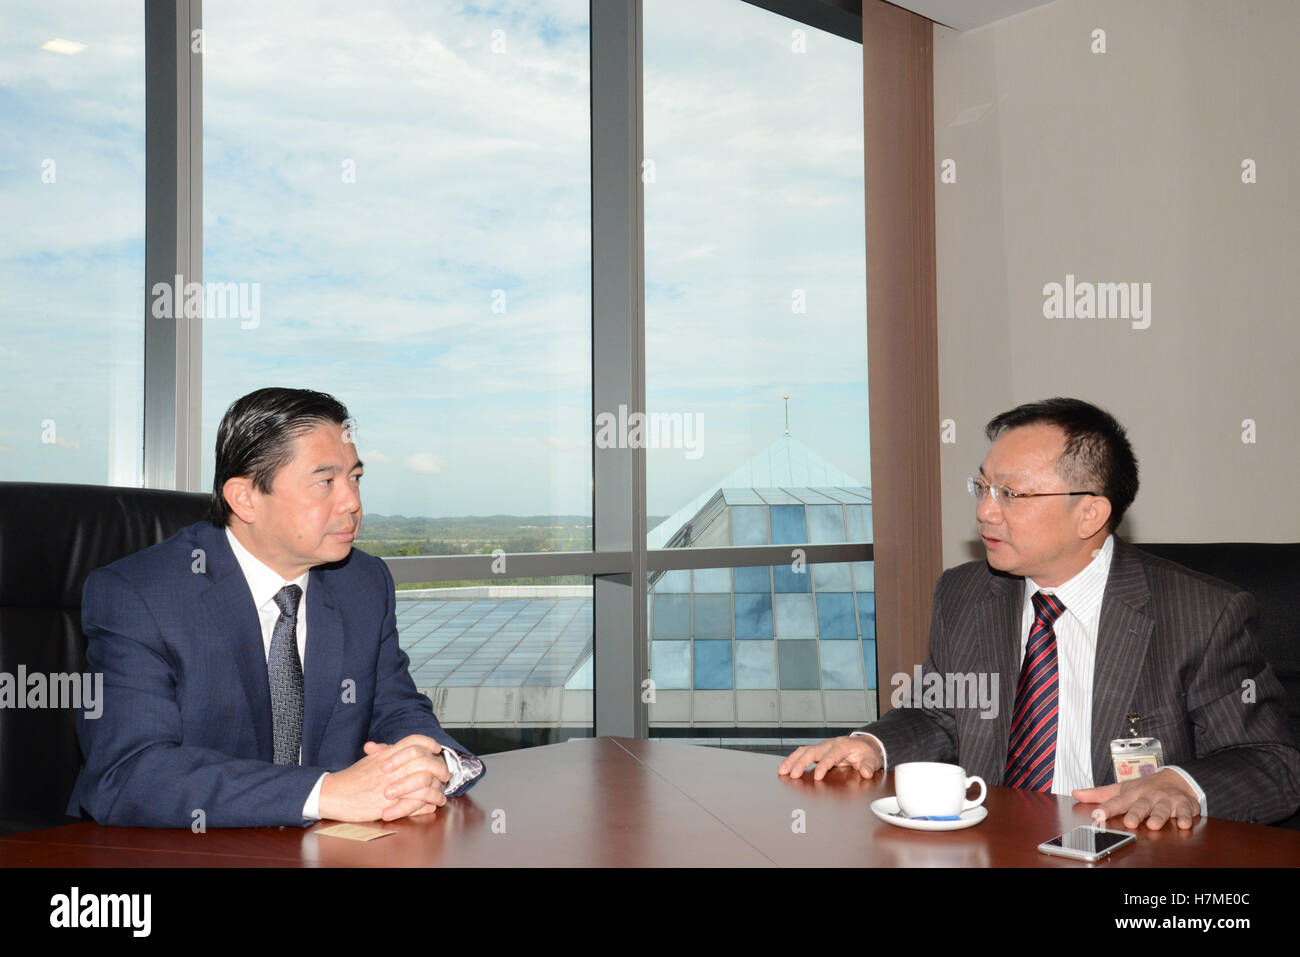 Bandar Seri Begawan, Brunei. 7th Nov, 2016. Brunei's Deputy Minister of Finance Dato Mohd Amin Liew (L) meets with Wang Xiaolin, the head of Bank of China (Hong Kong) Limited (BOCHK) Brunei Branch Preparatory Team, in Bandar Seri Begawan, Brunei, on Nov. 7, 2016. Brunei is looking forward to more economic cooperation from China and other countries in the world, so as to diversify the oil-rich sultanate's economy from hydrocarbon industries, a senior government official told Xinhua Monday morning. © Jeffrey Wong/Xinhua/Alamy Live News Stock Photo